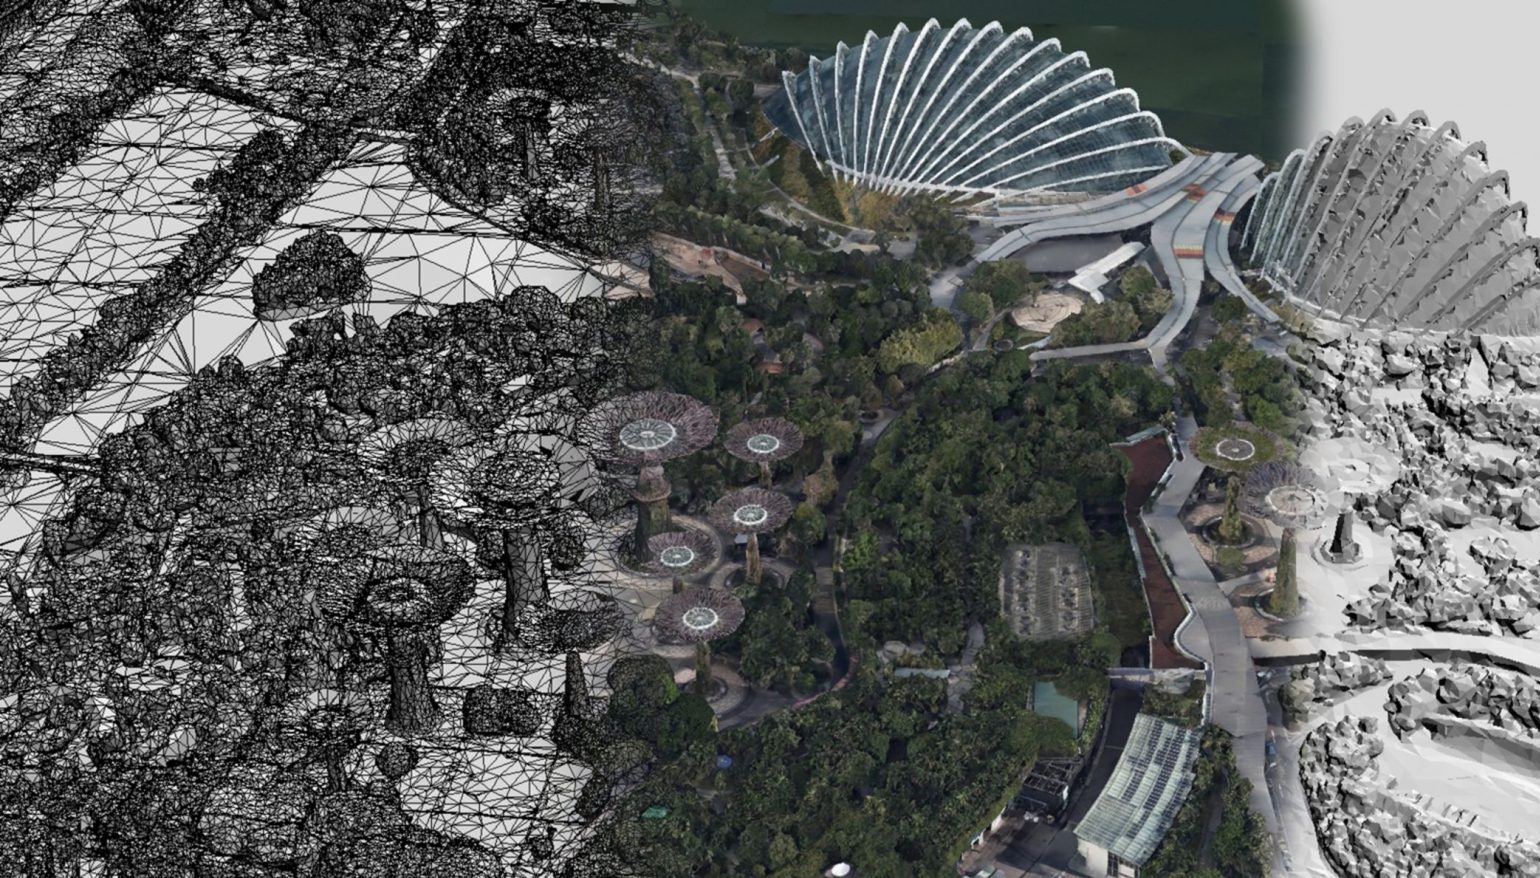 A 3-D “reality mesh” of Singapore’s national garden, Gardens by the Bay, enables the mapping team to capture the shape and other attributes of vegetation. Courtesy of Singapore Land Authority